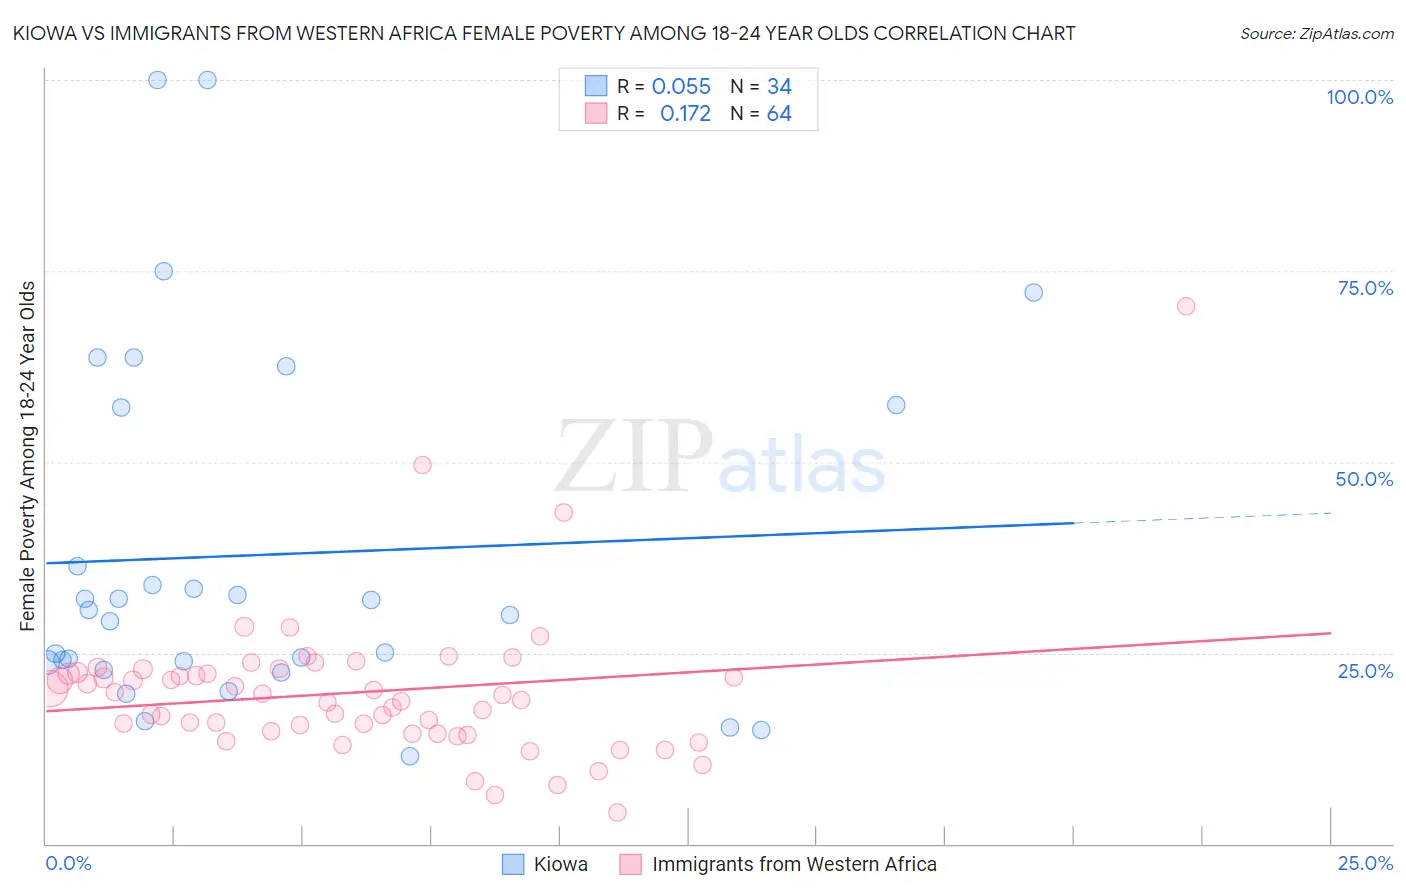 Kiowa vs Immigrants from Western Africa Female Poverty Among 18-24 Year Olds